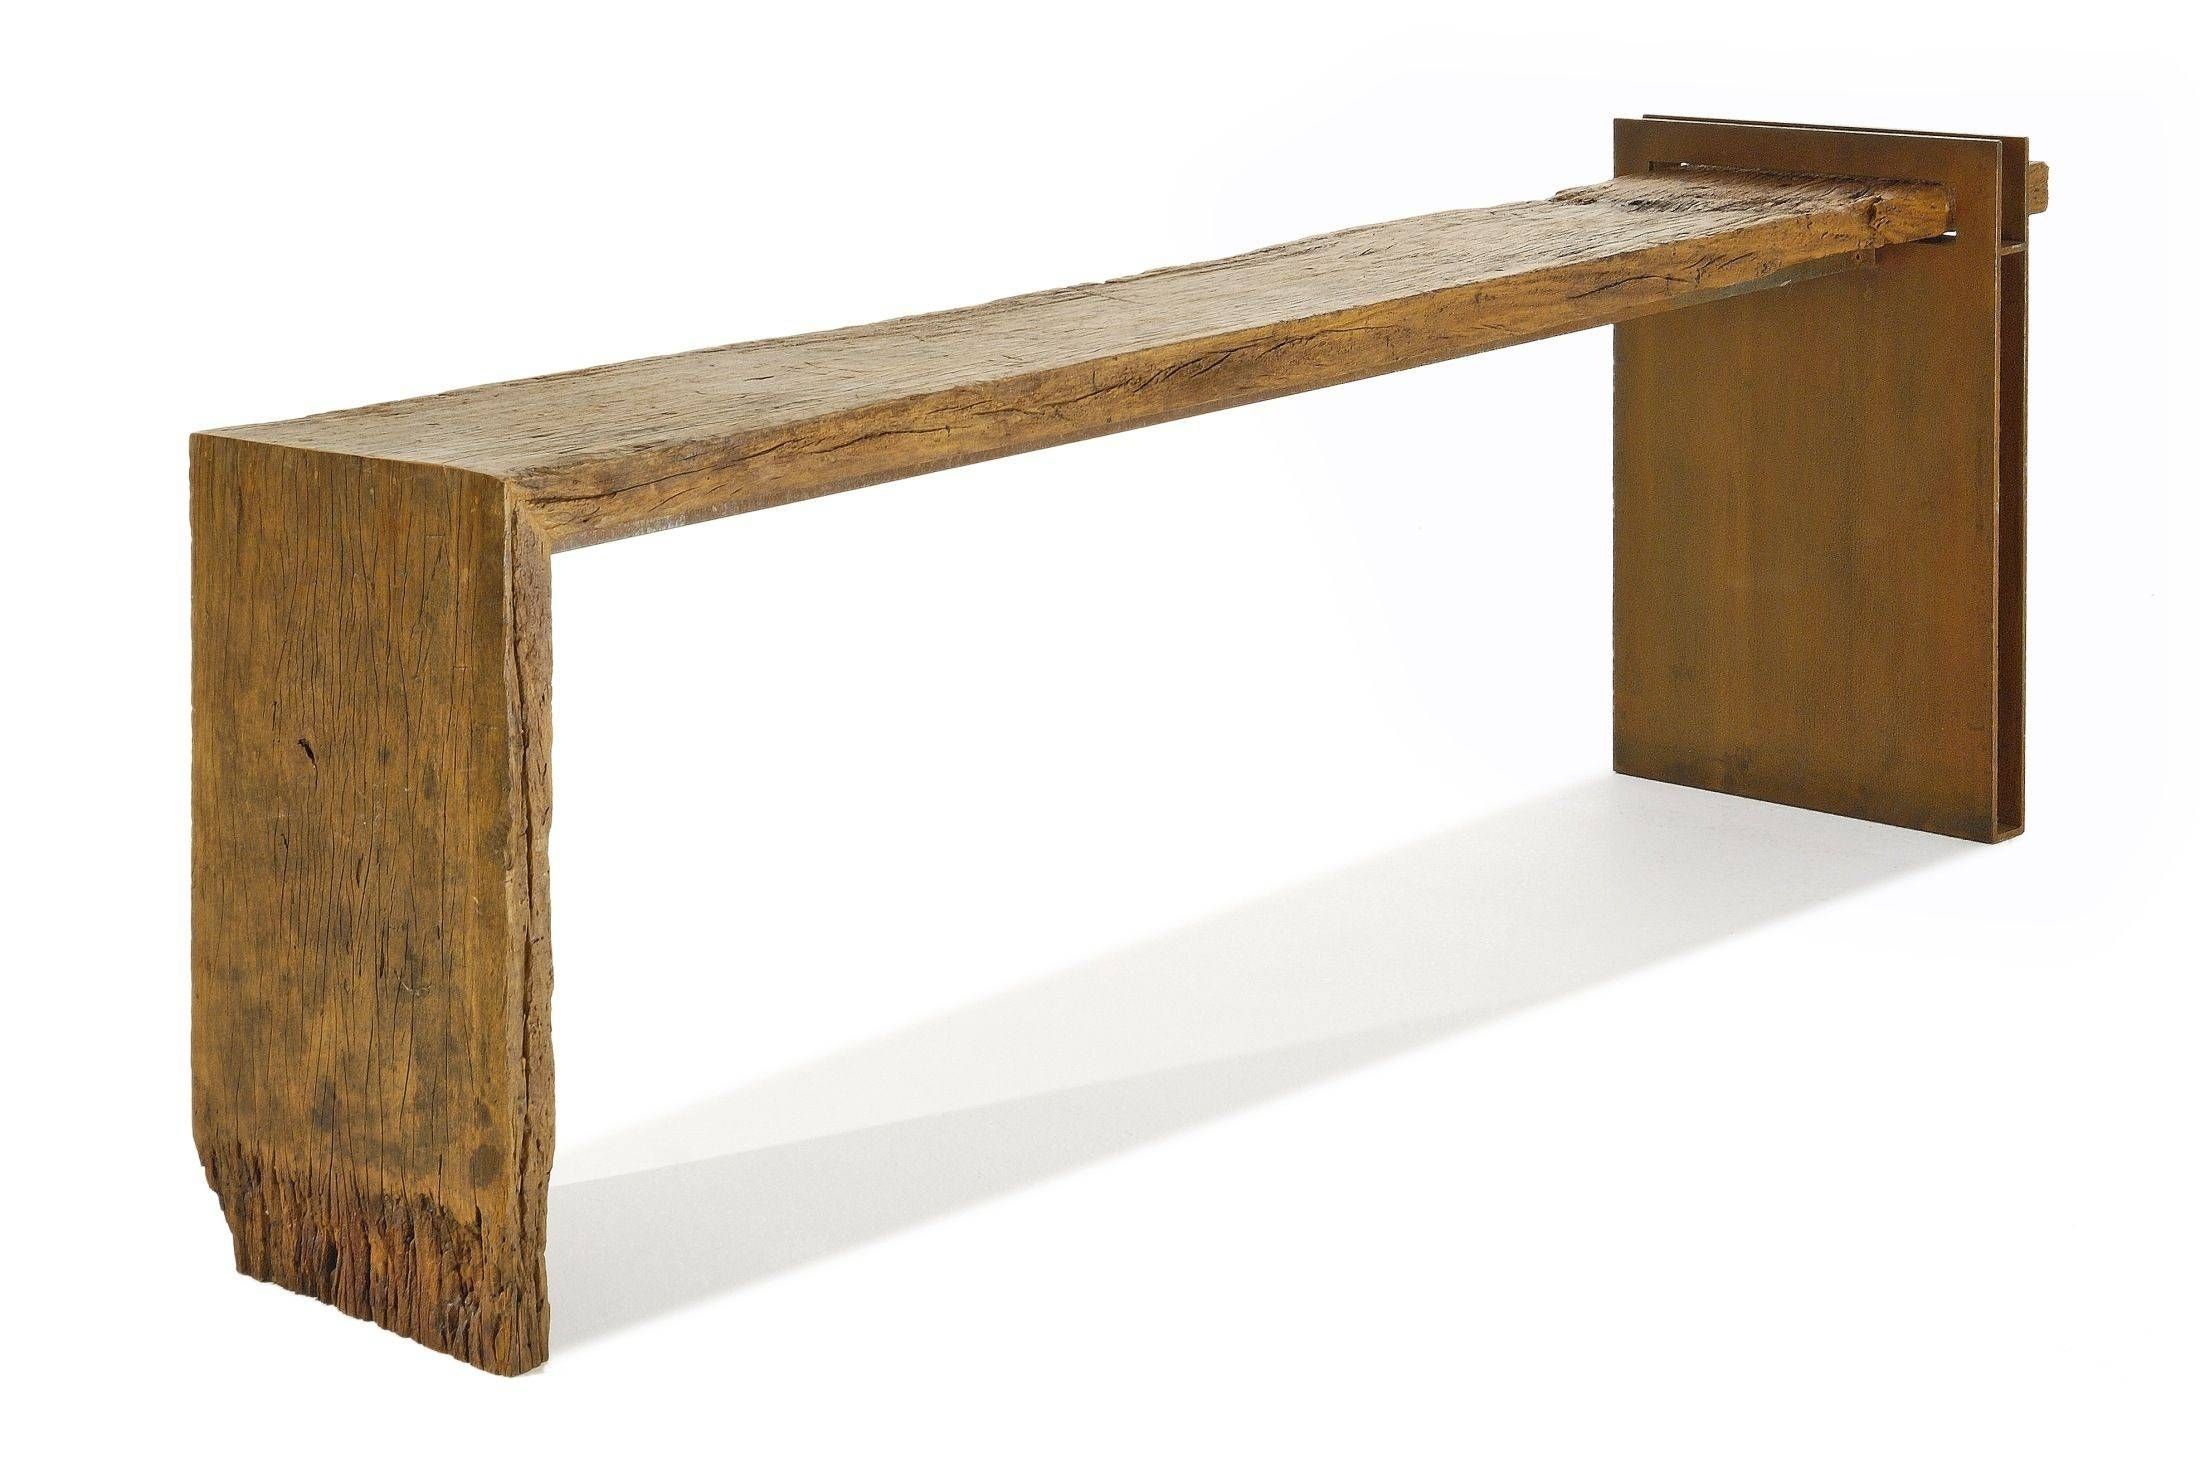 Contemporary Sideboard Table / Wooden / Rectangular / In Reclaimed Intended For Most Recently Released Wooden Sideboard Furniture (View 7 of 15)